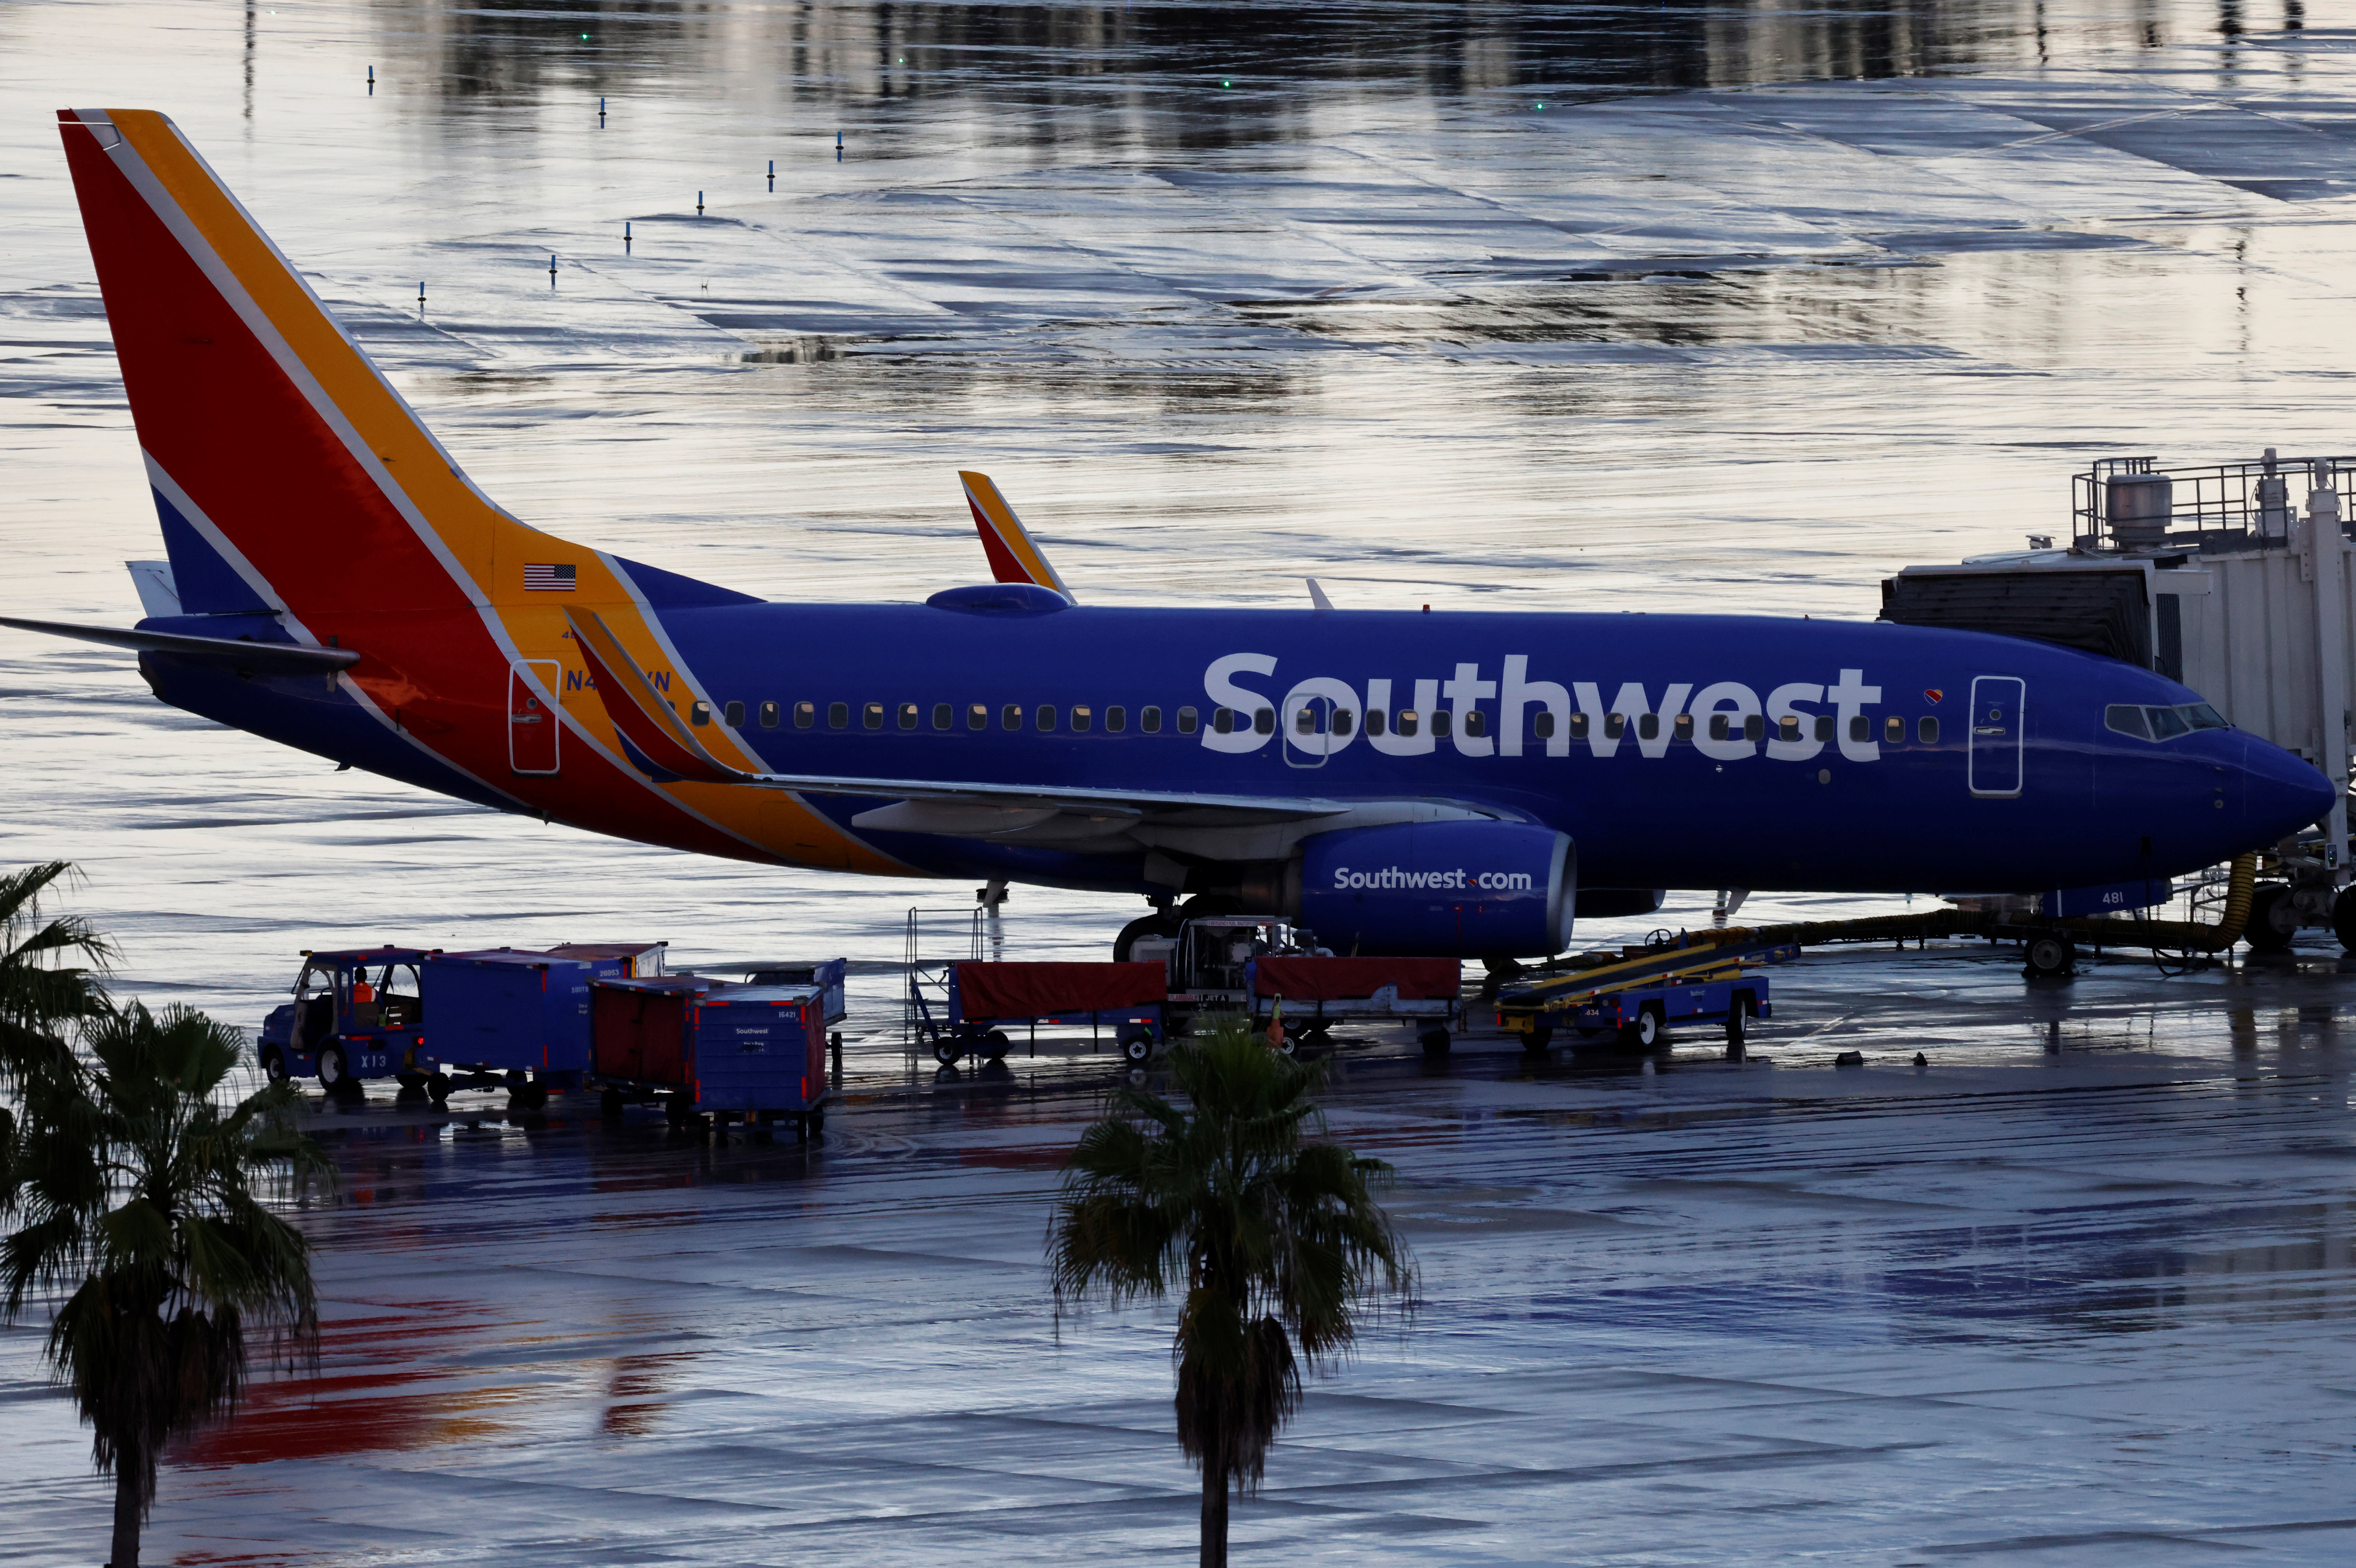 A Southwest Airlines jet sits at a gate at Orlando International Airport in Orlando